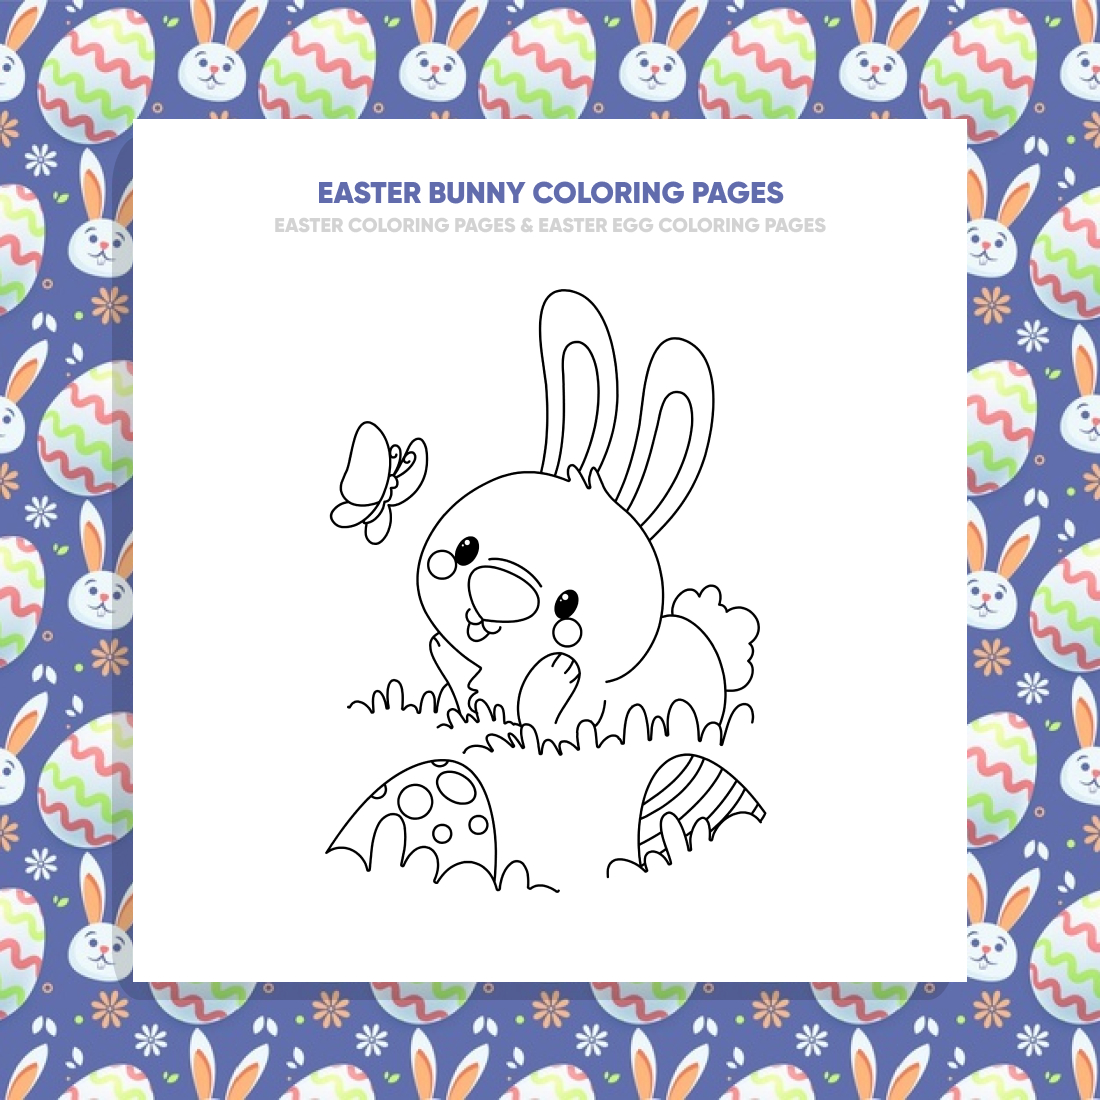 Easter Bunny Coloring Pages preview image.